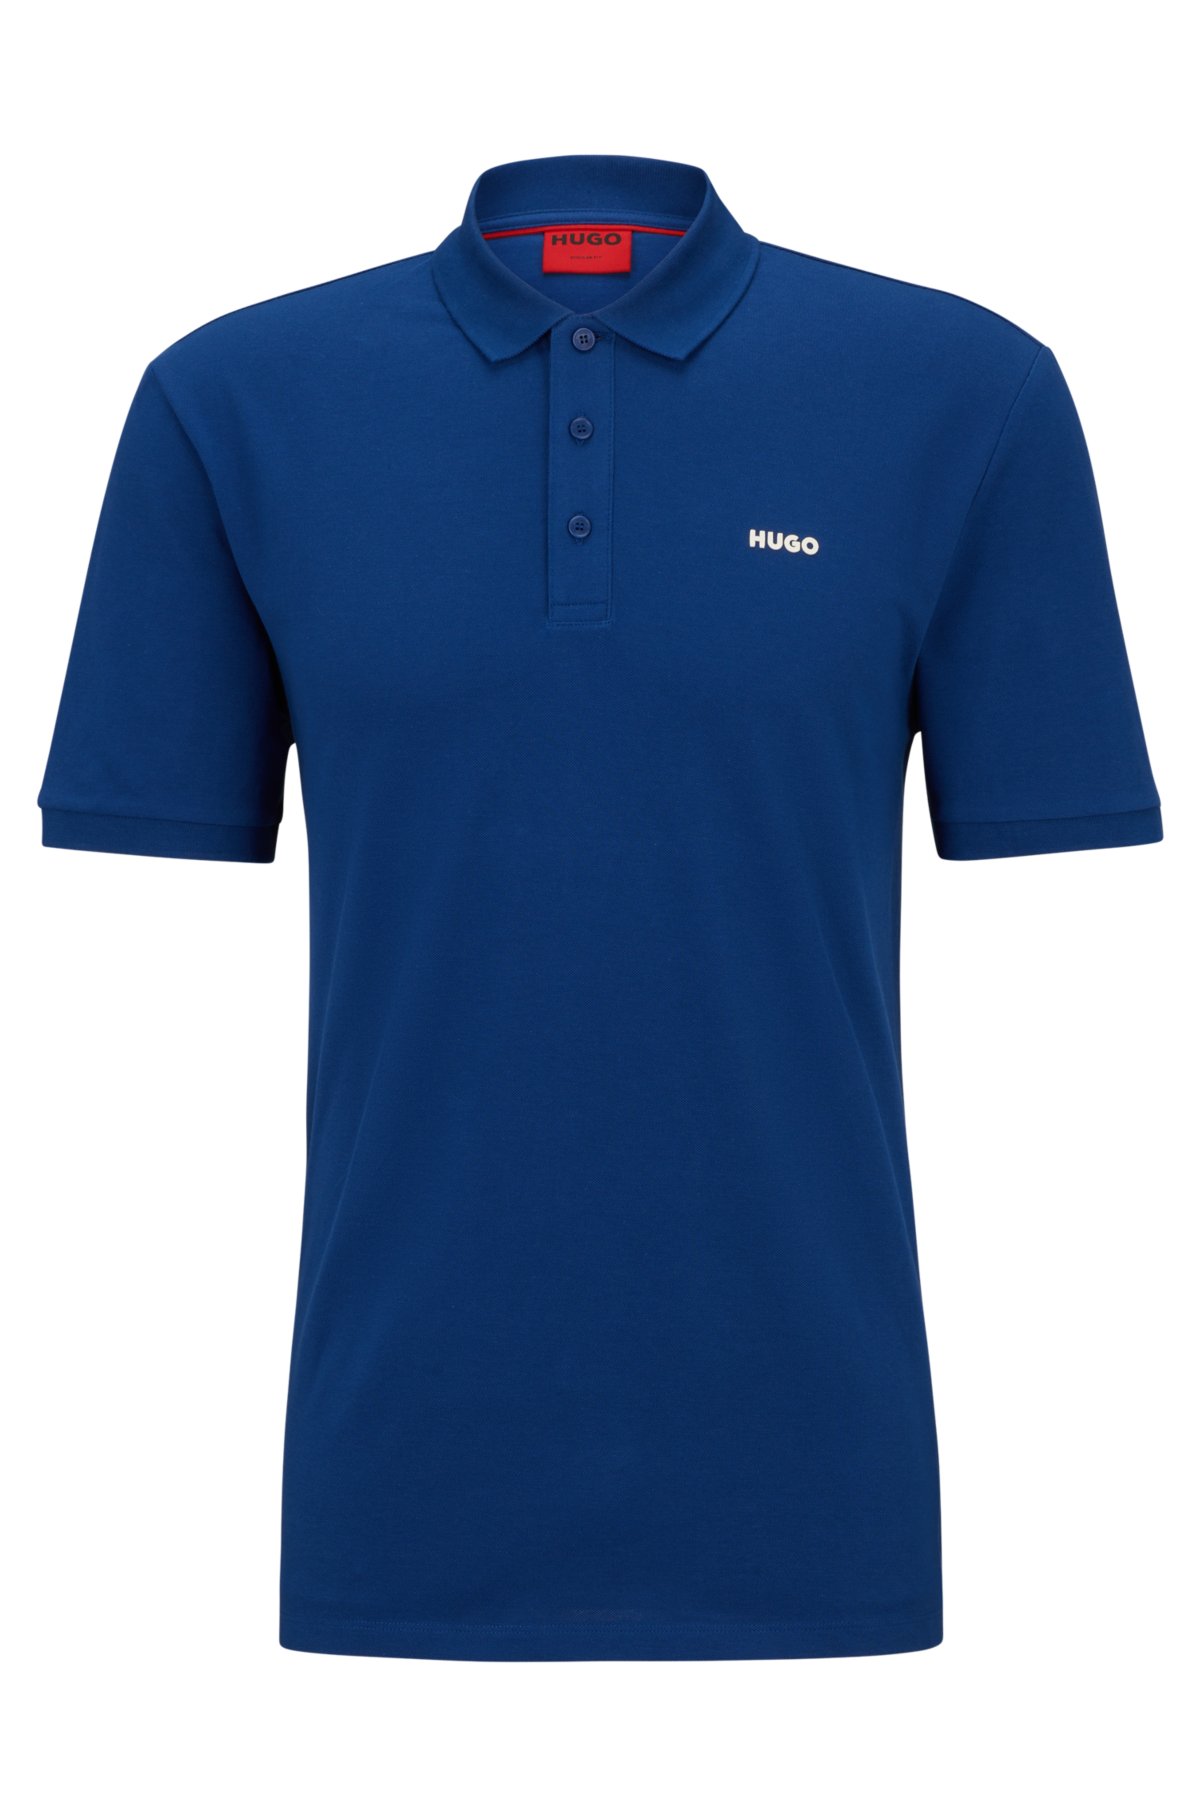  Lacoste Boy's Short Sleeve Relaxed-fit Graphic Polo Shirt:  Clothing, Shoes & Jewelry